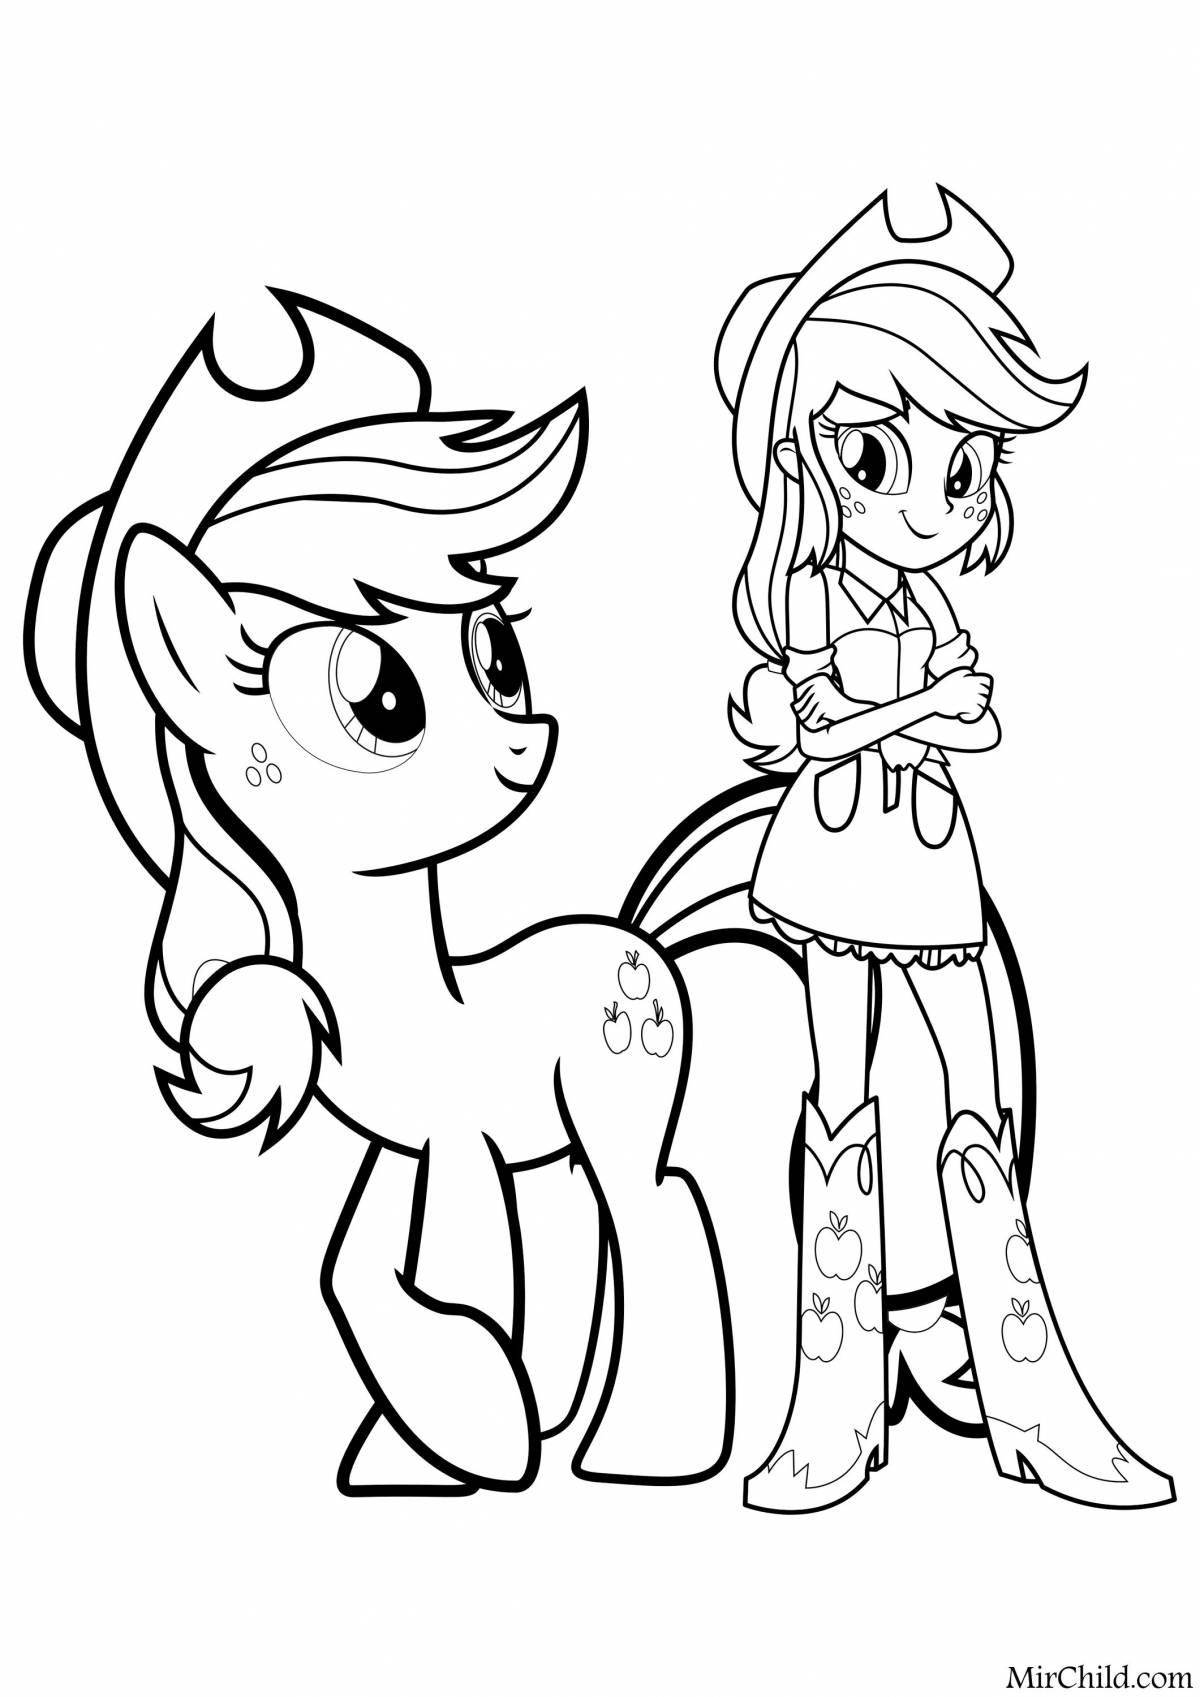 Adorable little pony girls coloring pages